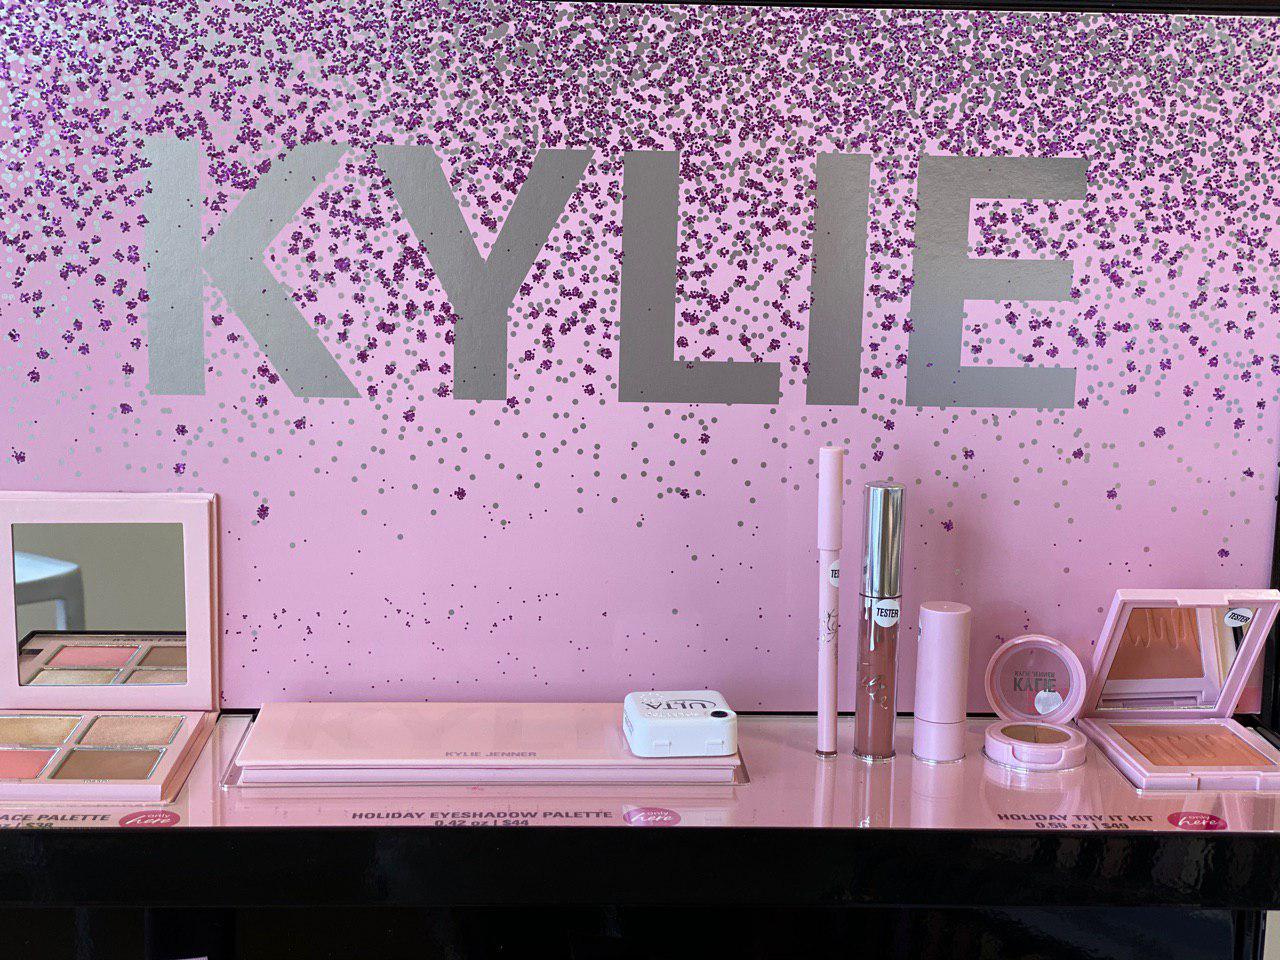 New Kylie Holiday Cosmetics Offers